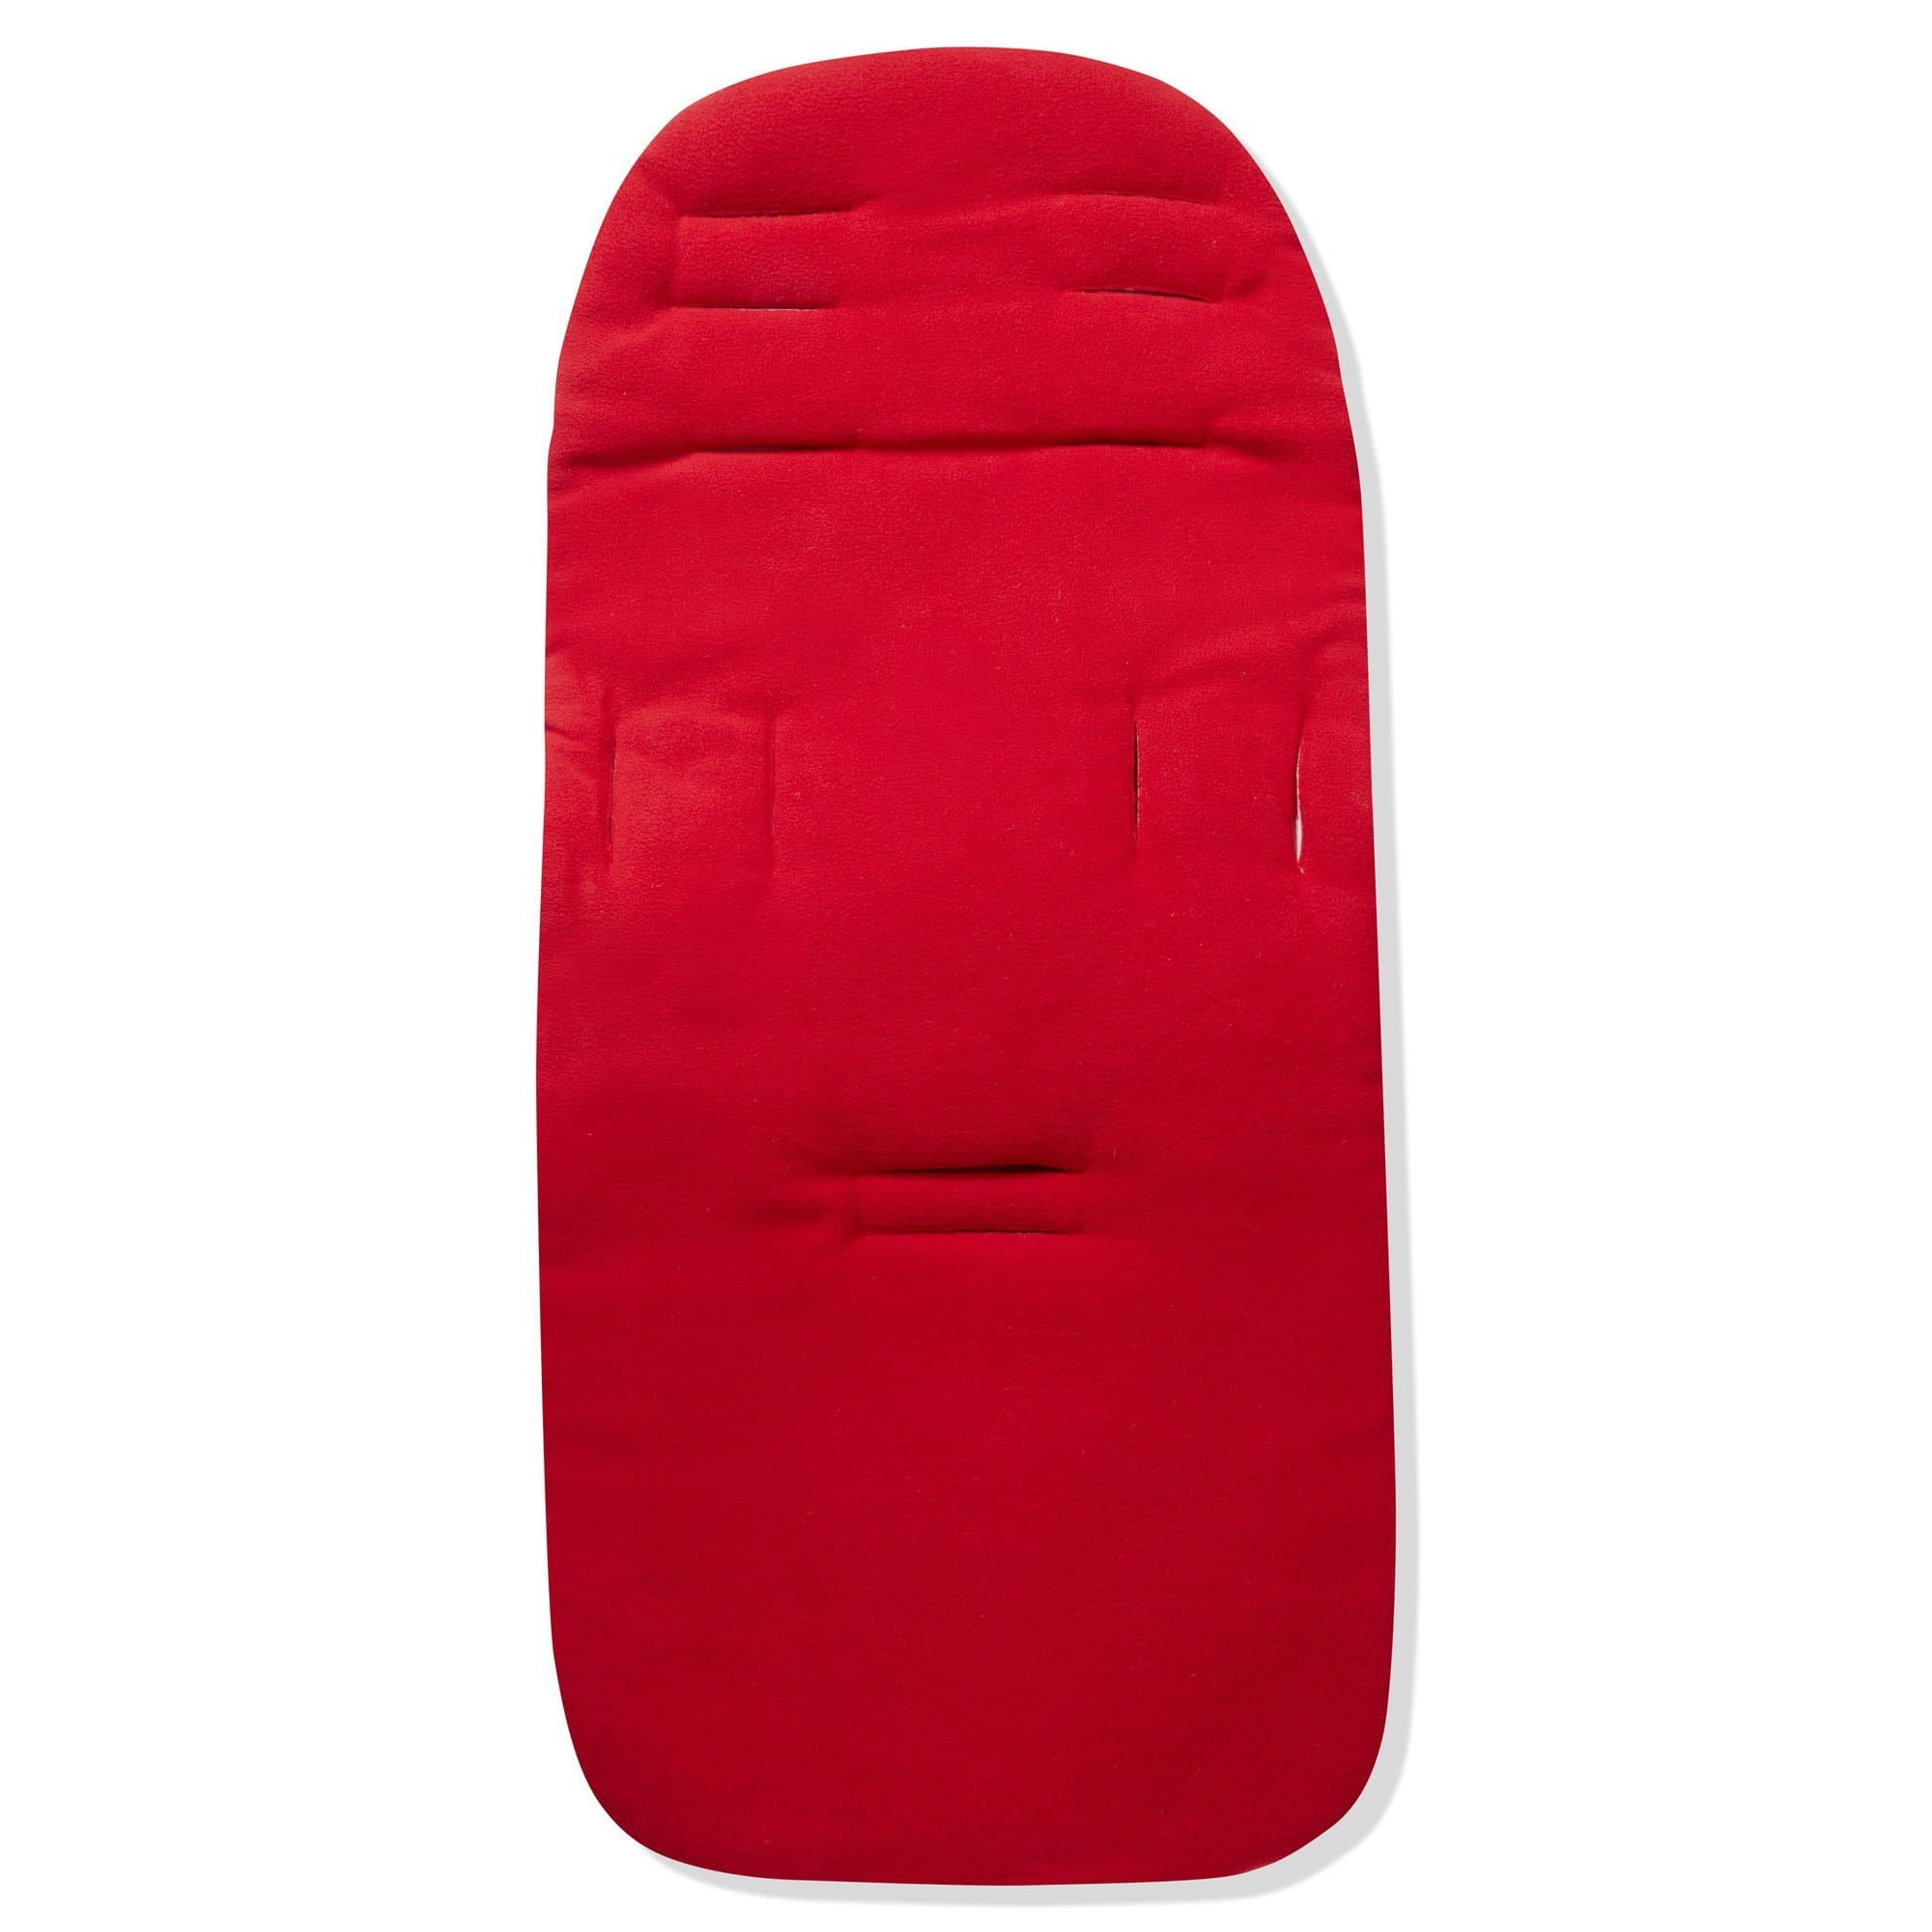 Fleece Footmuff / Cosy Toes Compatible with Red Kite - For Your Little One